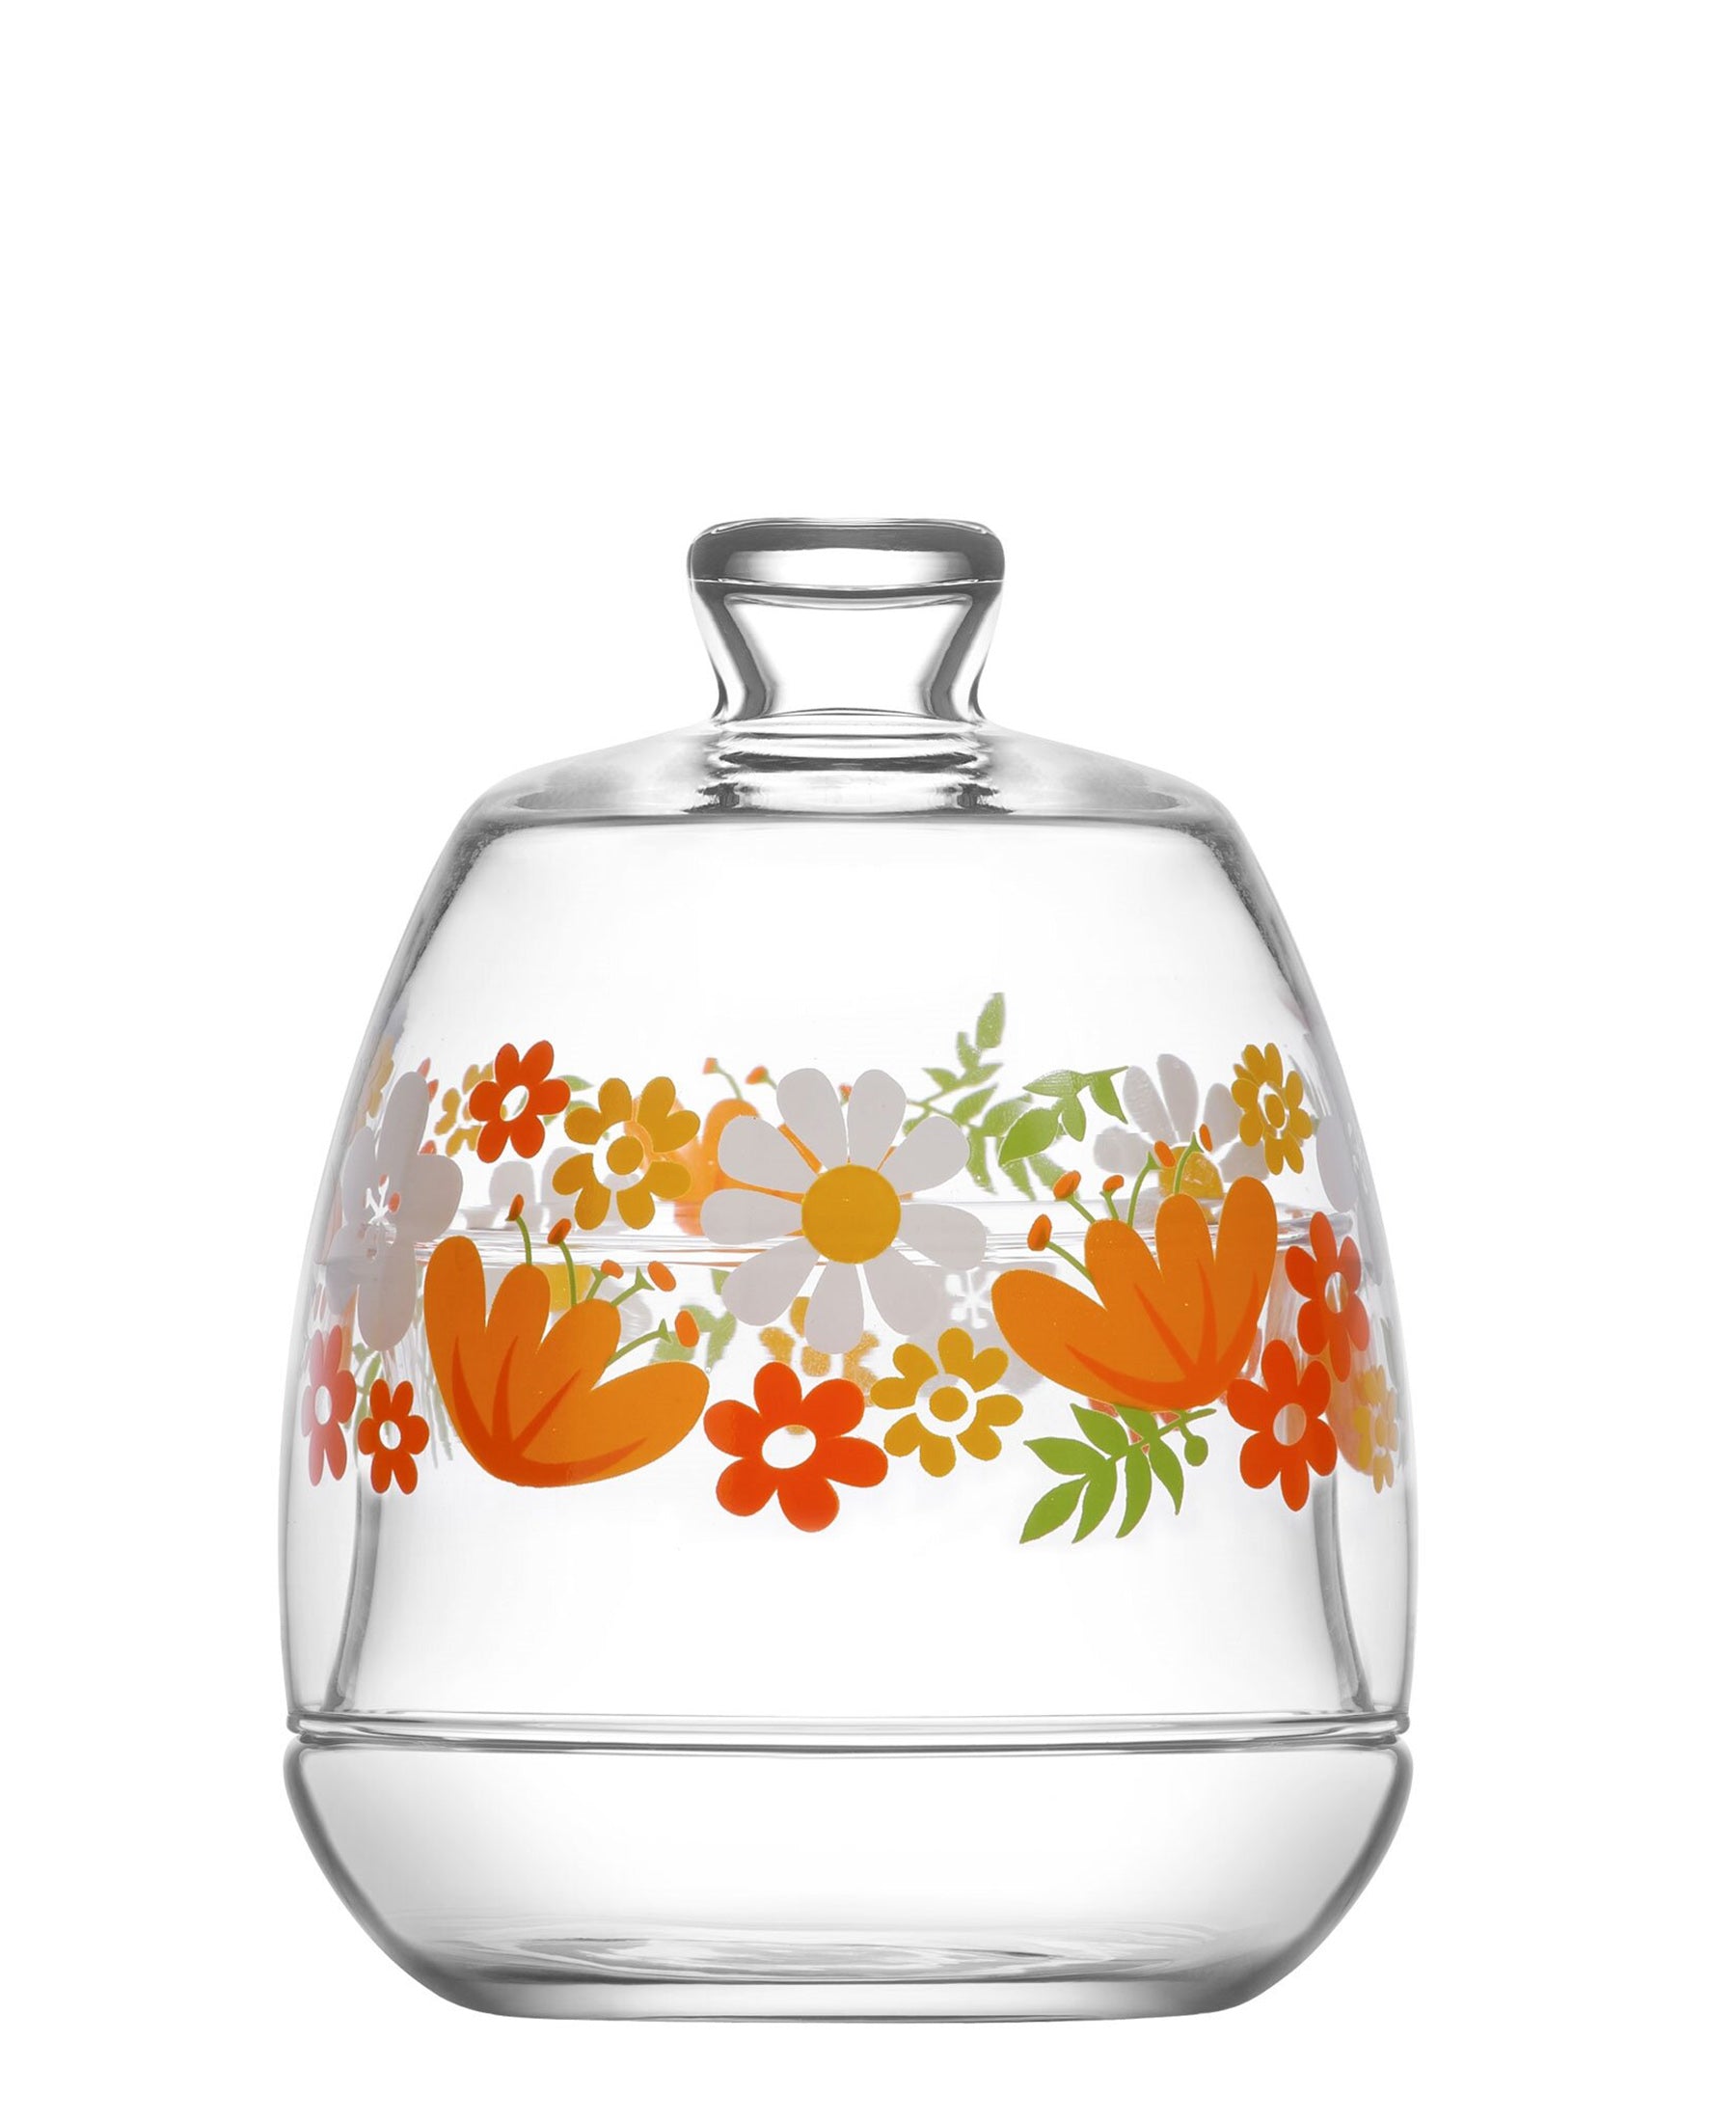 LAV Sole Sugar Bowl - Clear With Floral Print